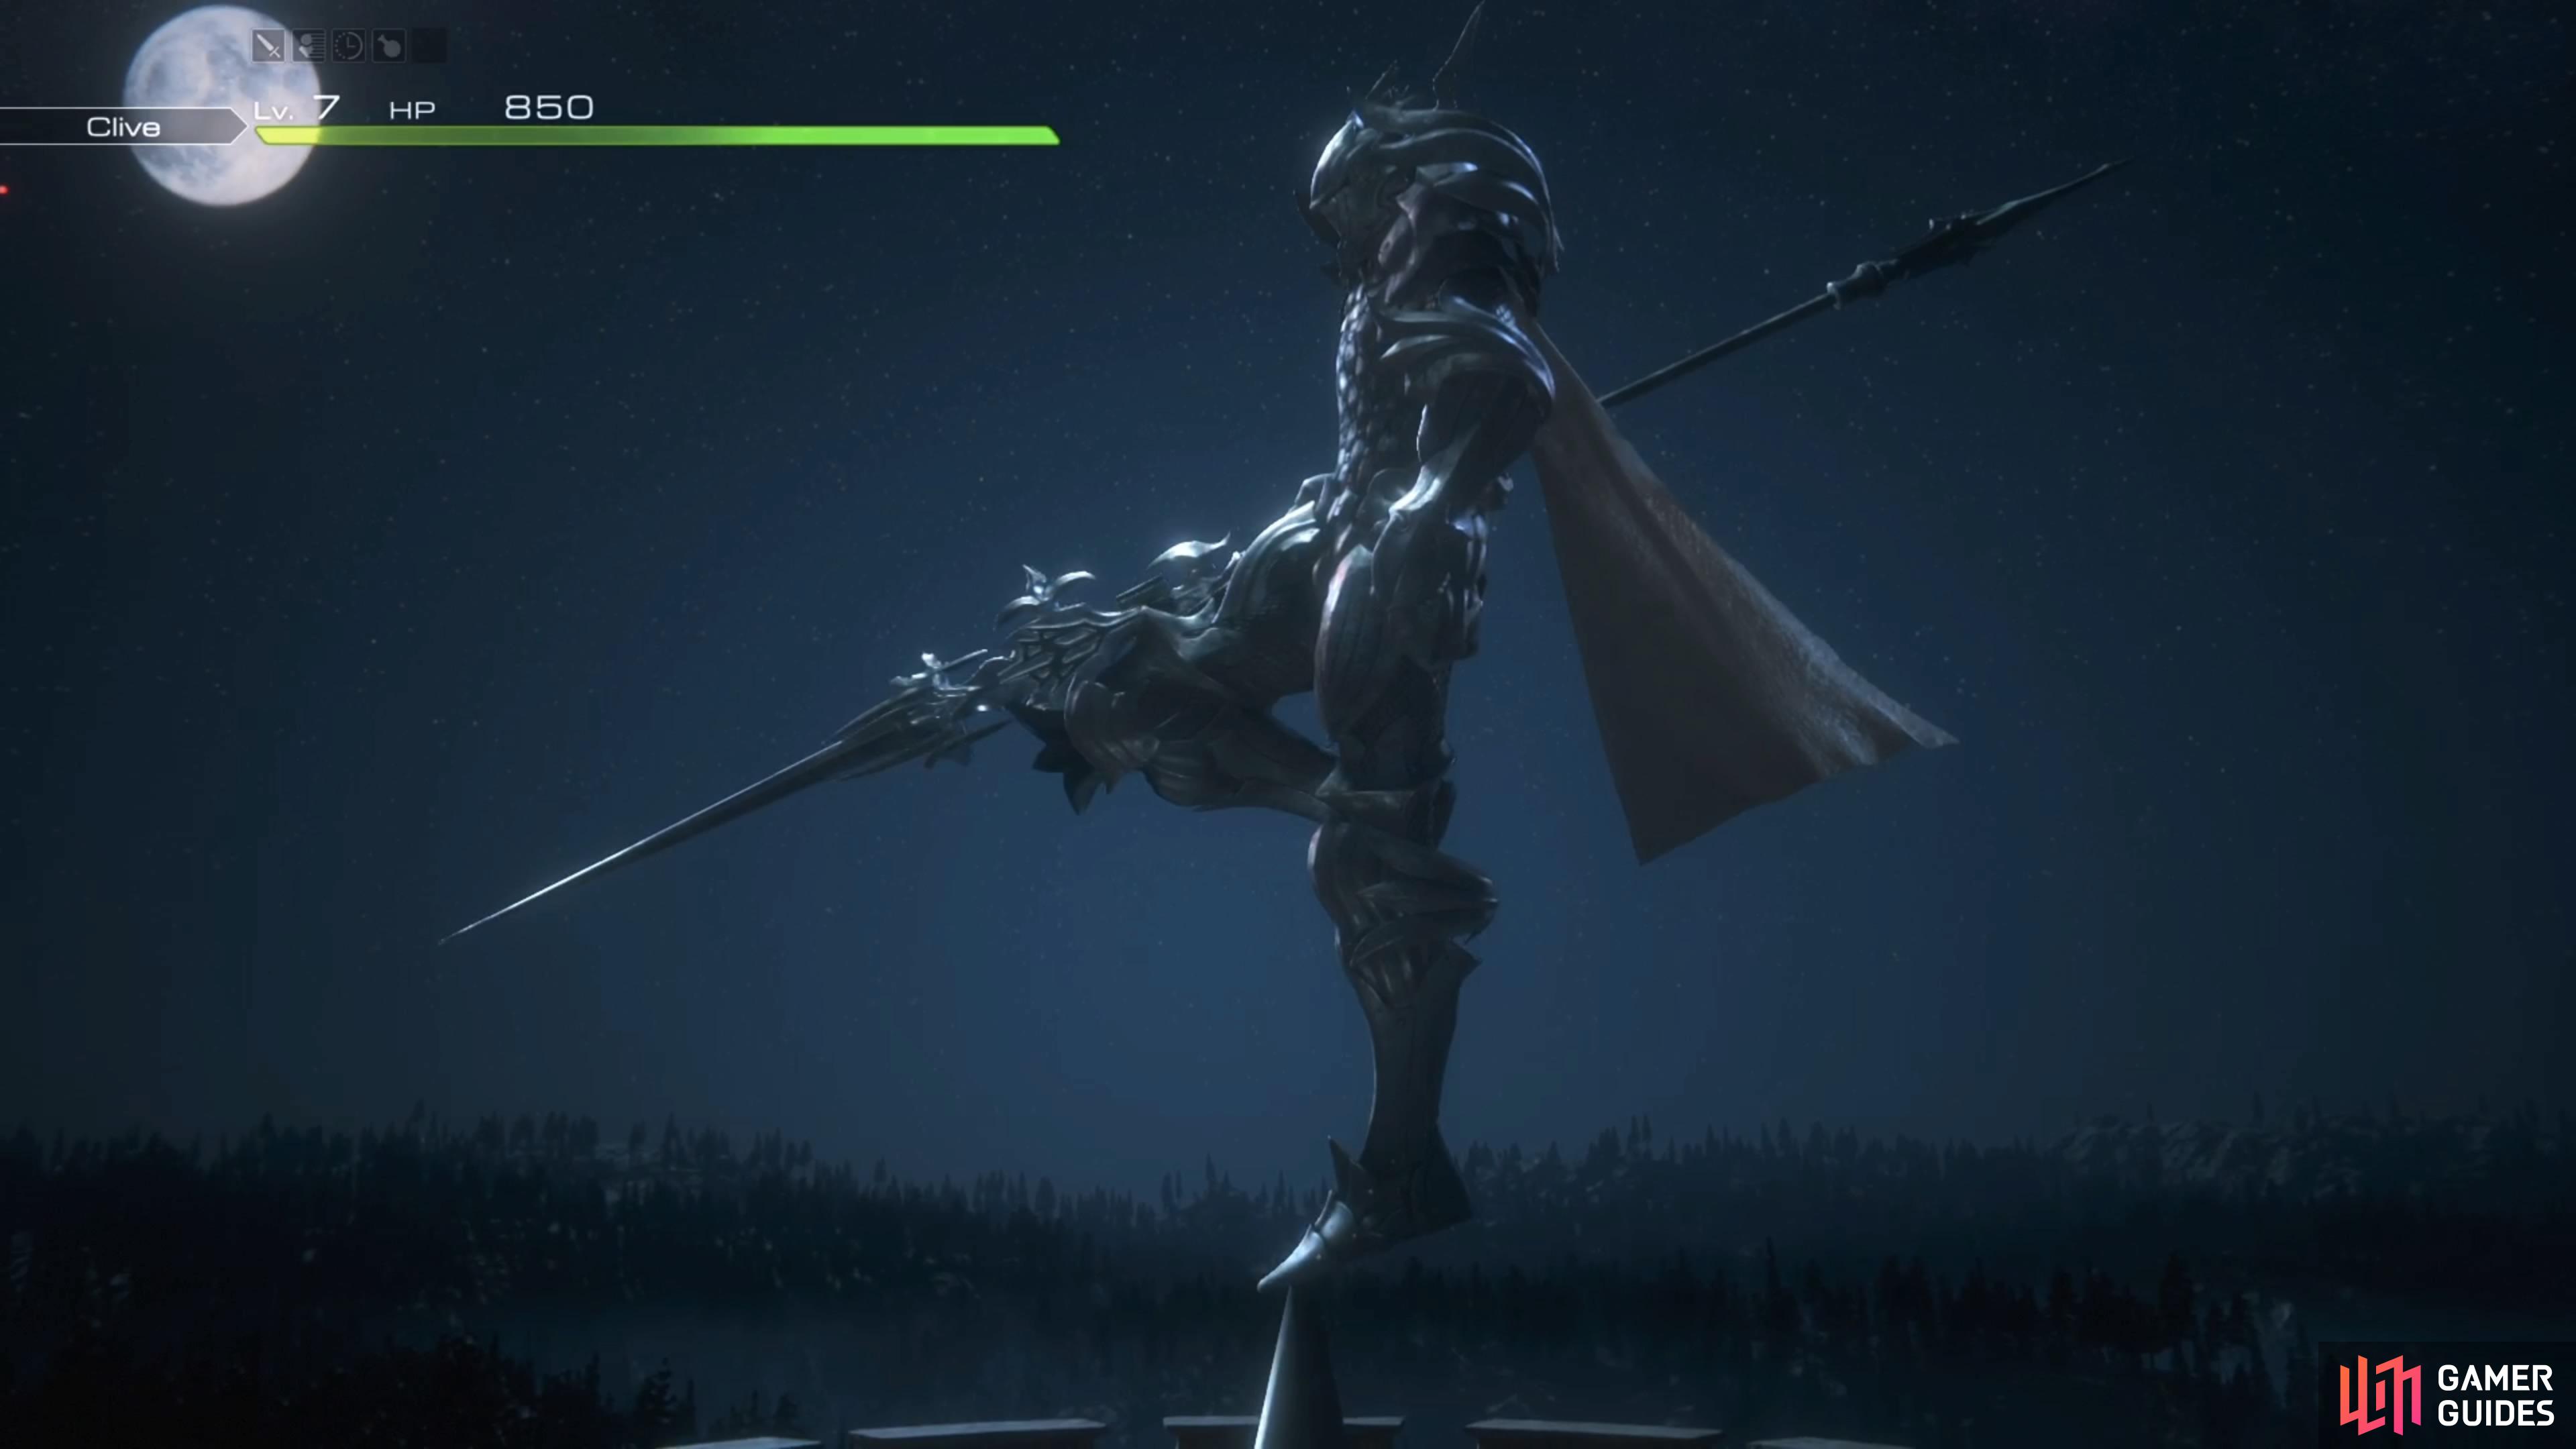 The Knight of the Blinding Dawn certainly knows how to make an entrance.